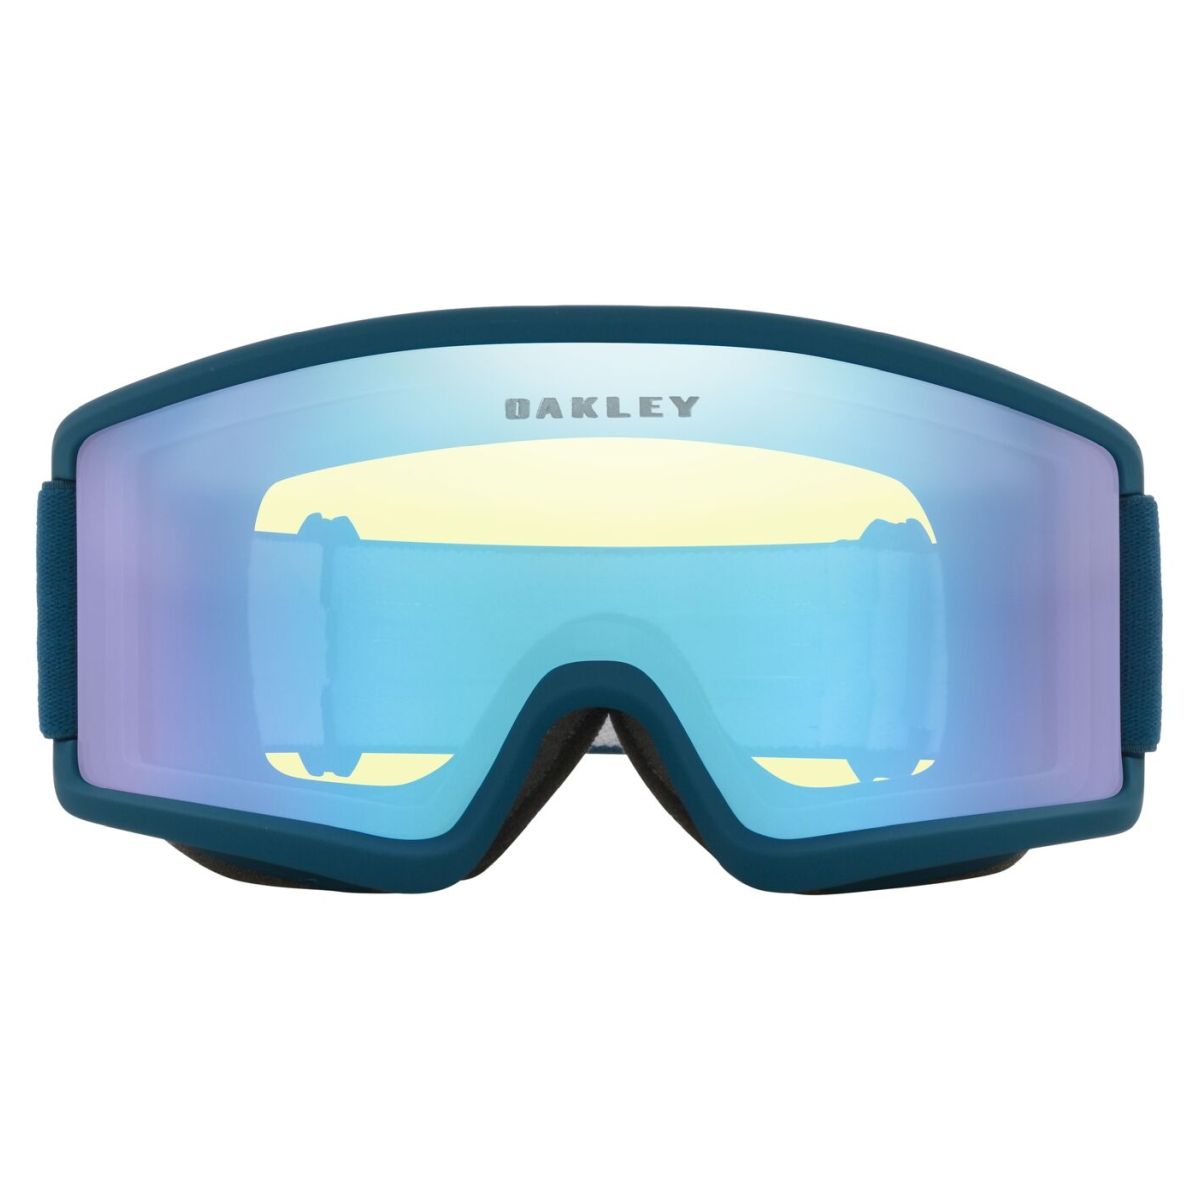 OAKLEY TARGET LINE S SNOW GOGGLES 7122/10/00